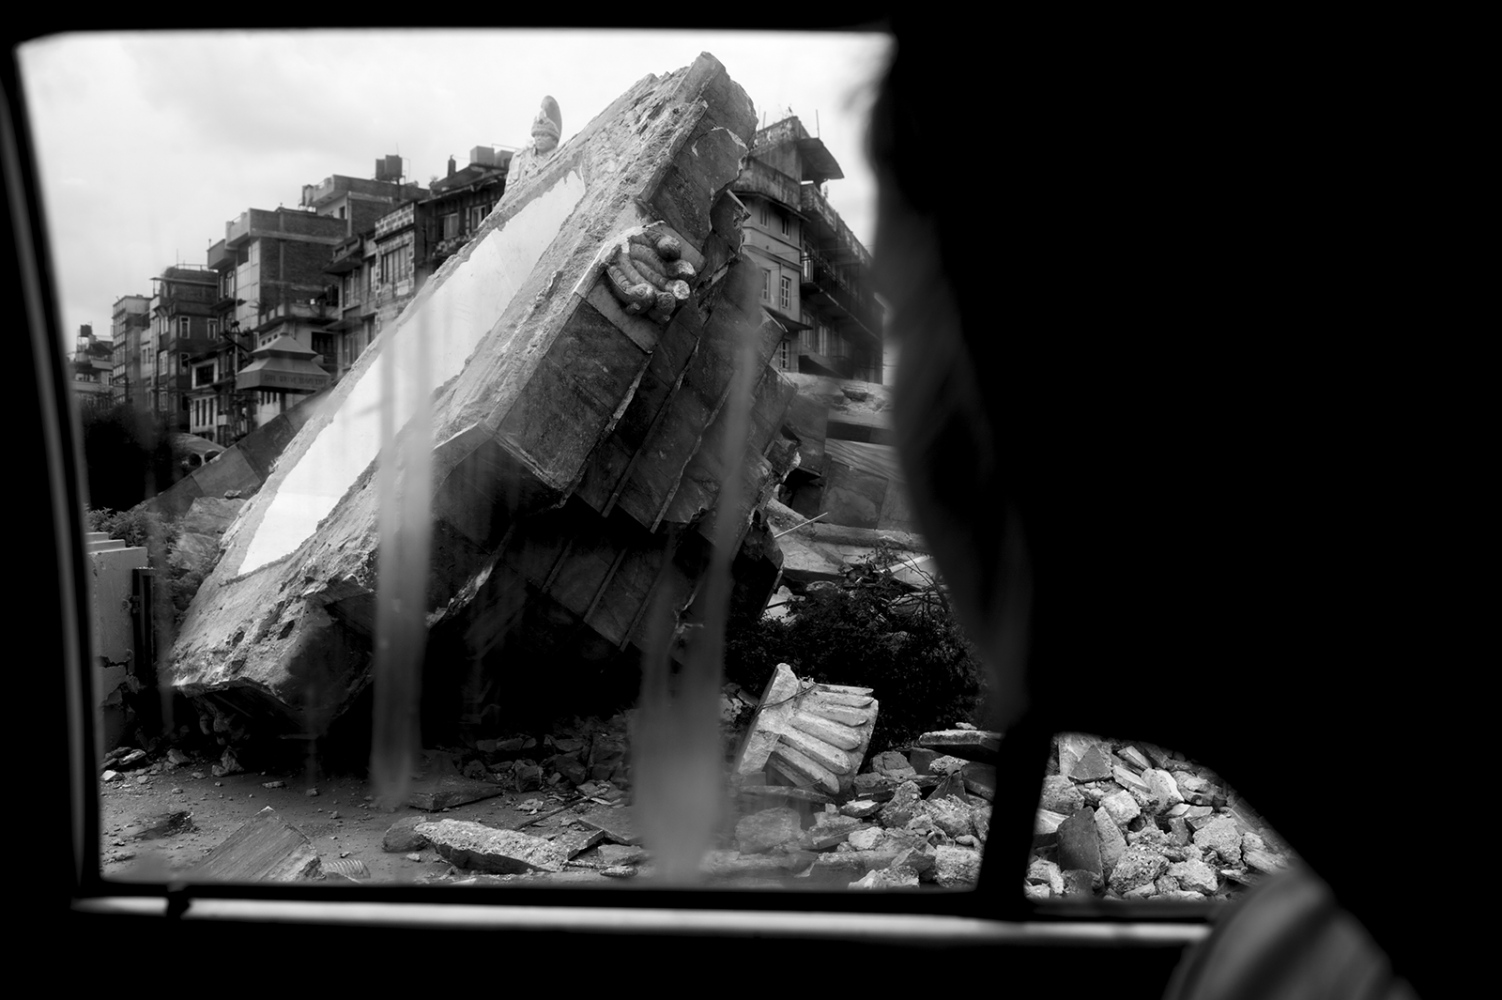  Destructions were visible everywhere in Kathmandu. On image a tourist taking a taxi past a roundabout.Â 